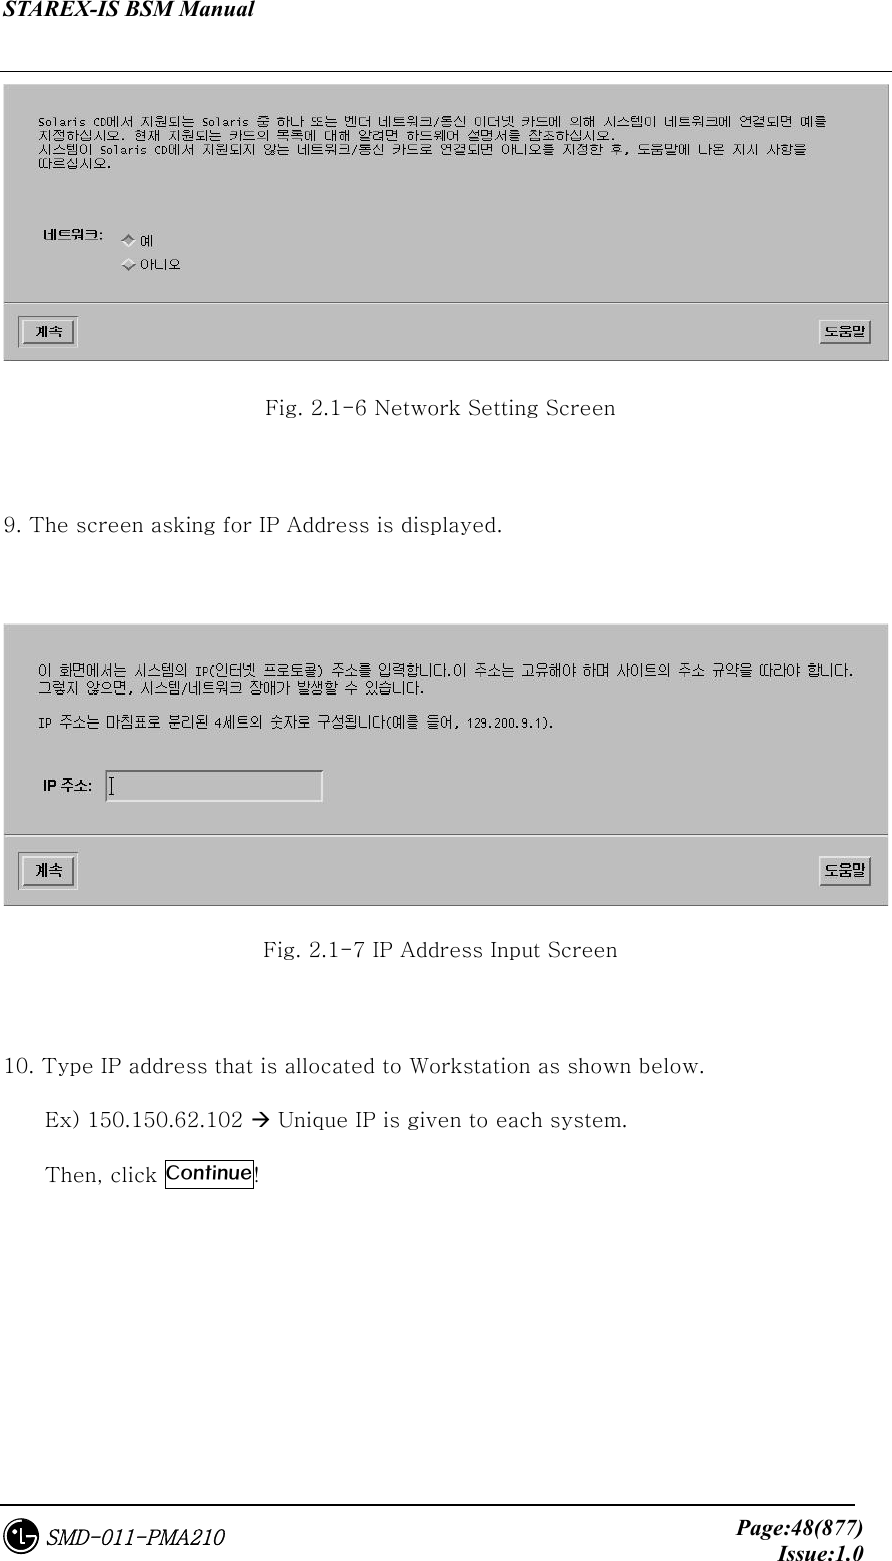 STAREX-IS BSM Manual     Page:48(877)Issue:1.0SMD-011-PMA210  Fig. 2.1-6 Network Setting Screen  9. The screen asking for IP Address is displayed.   Fig. 2.1-7 IP Address Input Screen  10. Type IP address that is allocated to Workstation as shown below.       Ex) 150.150.62.102  Unique IP is given to each system.   Then, click Continue!   